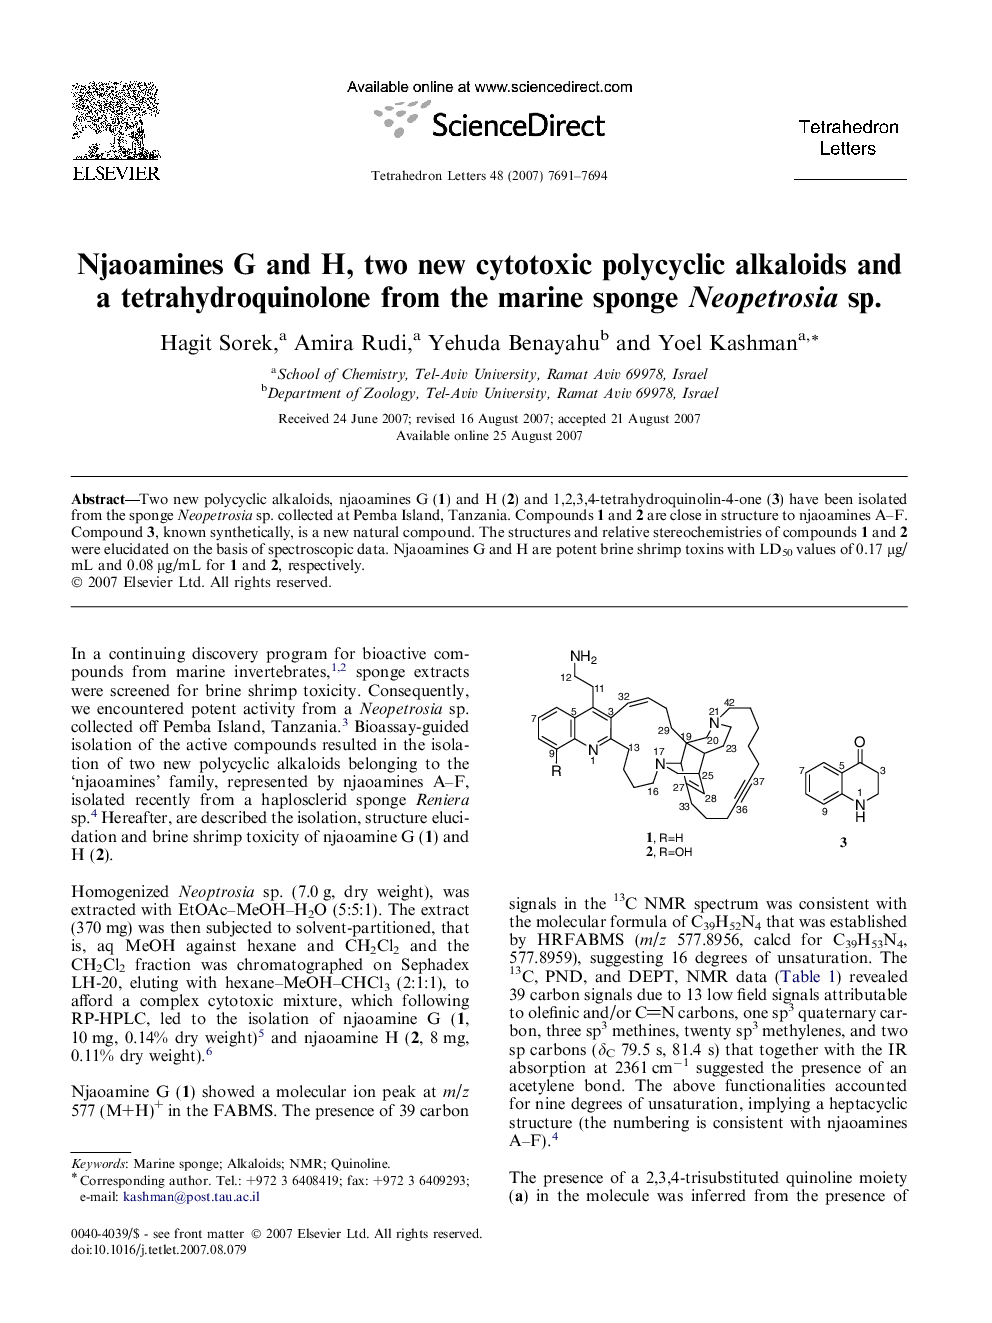 Njaoamines G and H, two new cytotoxic polycyclic alkaloids and a tetrahydroquinolone from the marine sponge Neopetrosia sp.